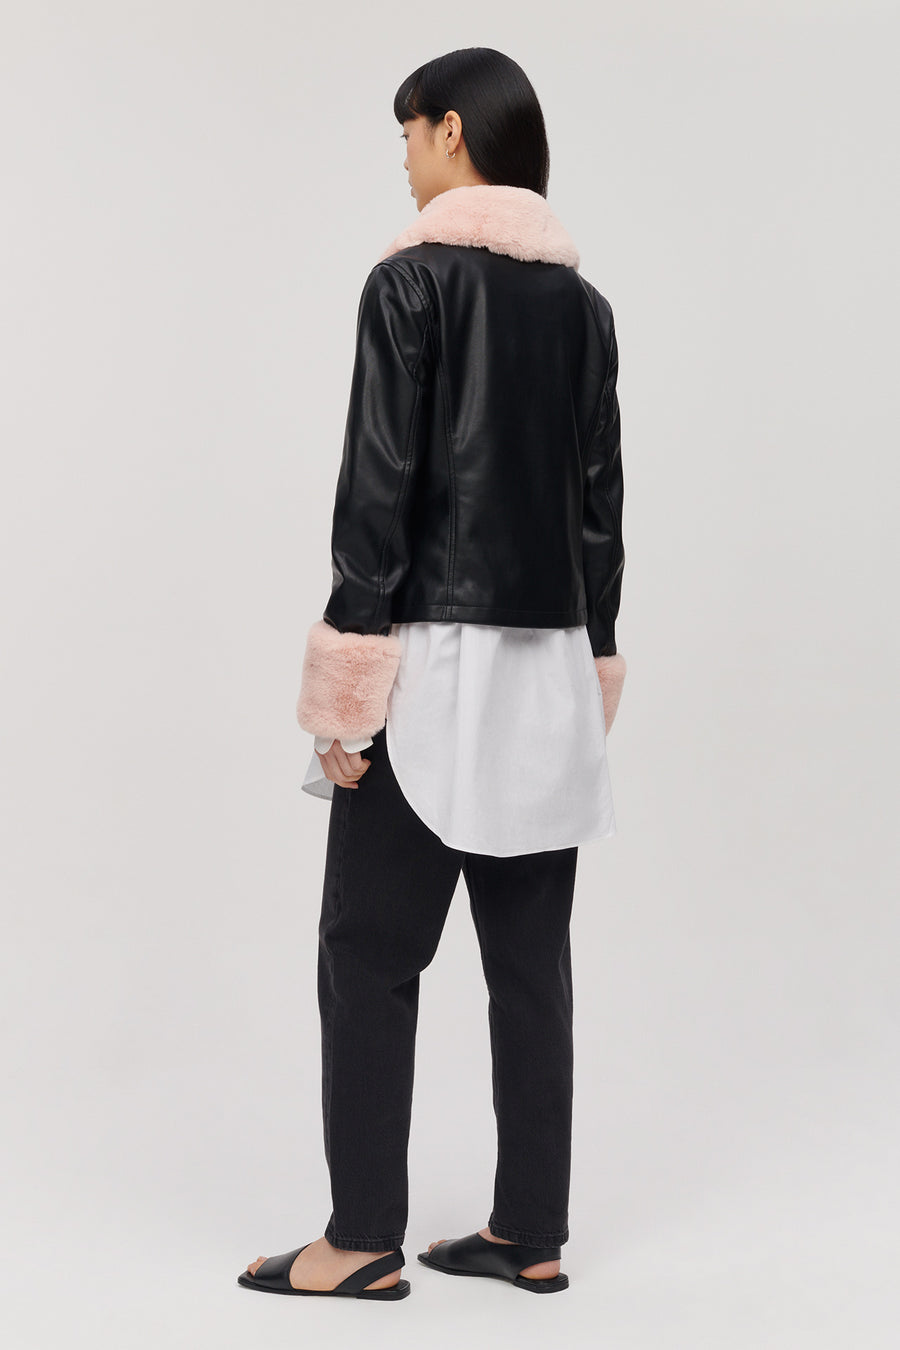 BRITTANY JACKET SOFT PINK AND BLACK